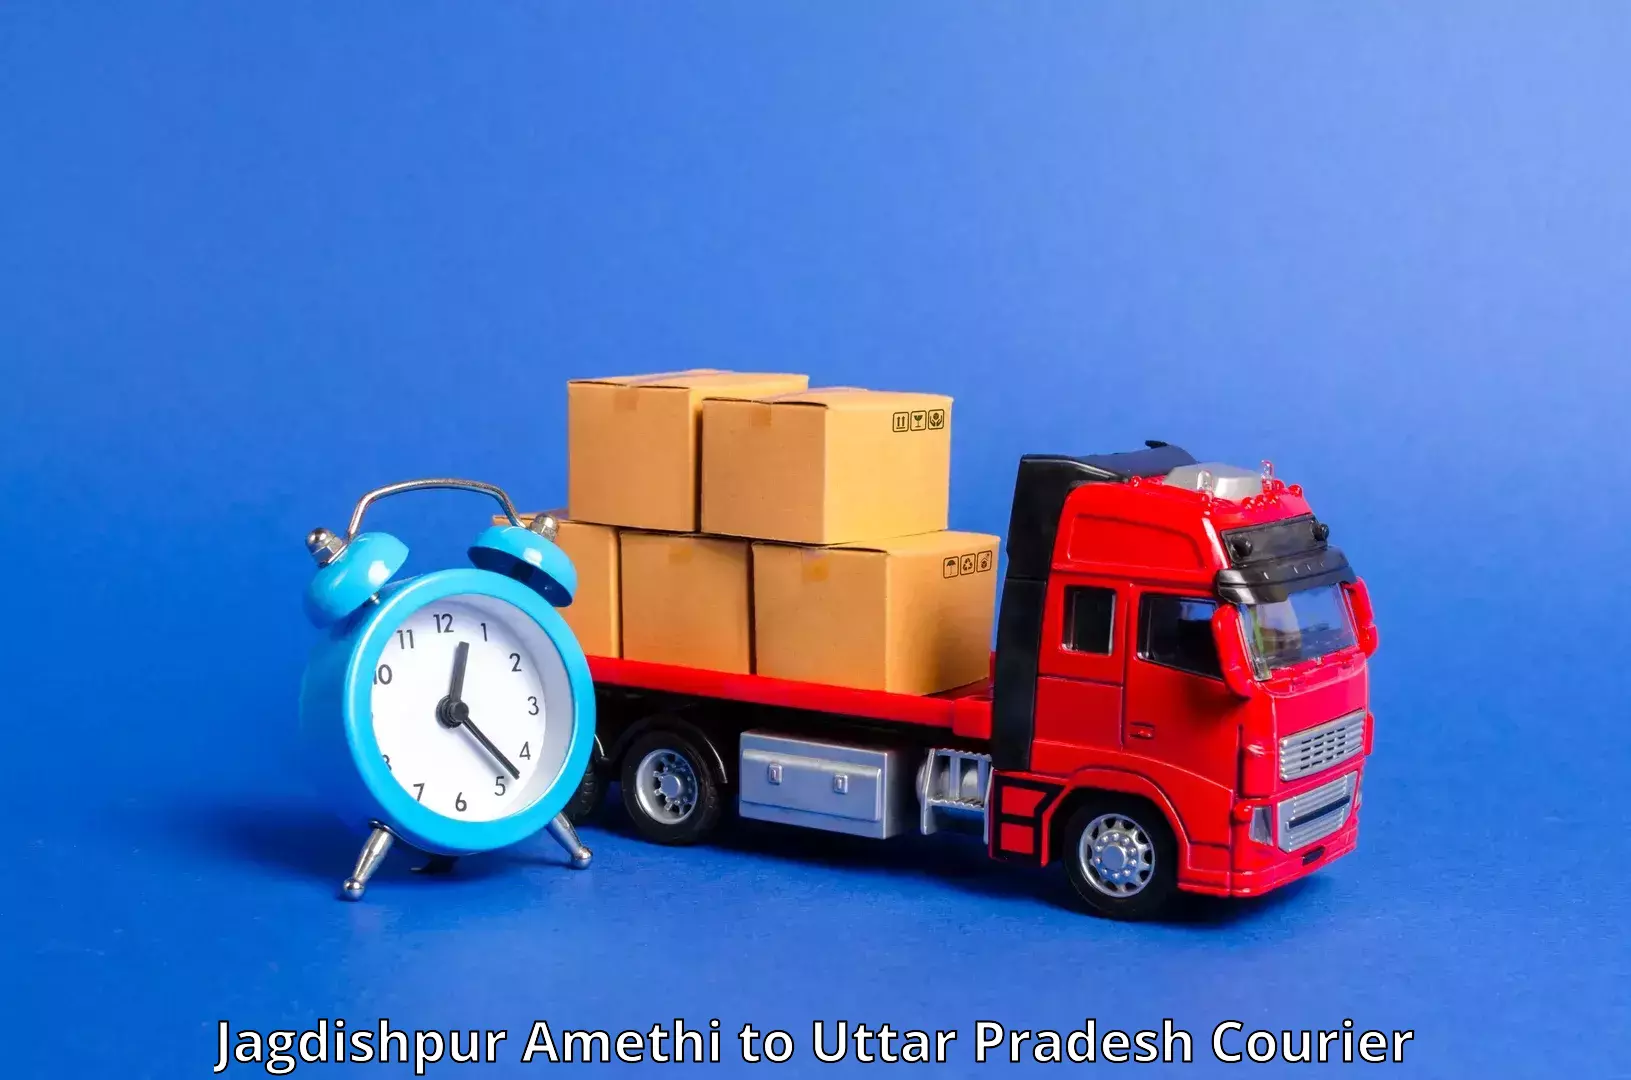 Express package services Jagdishpur Amethi to Chitrakoot